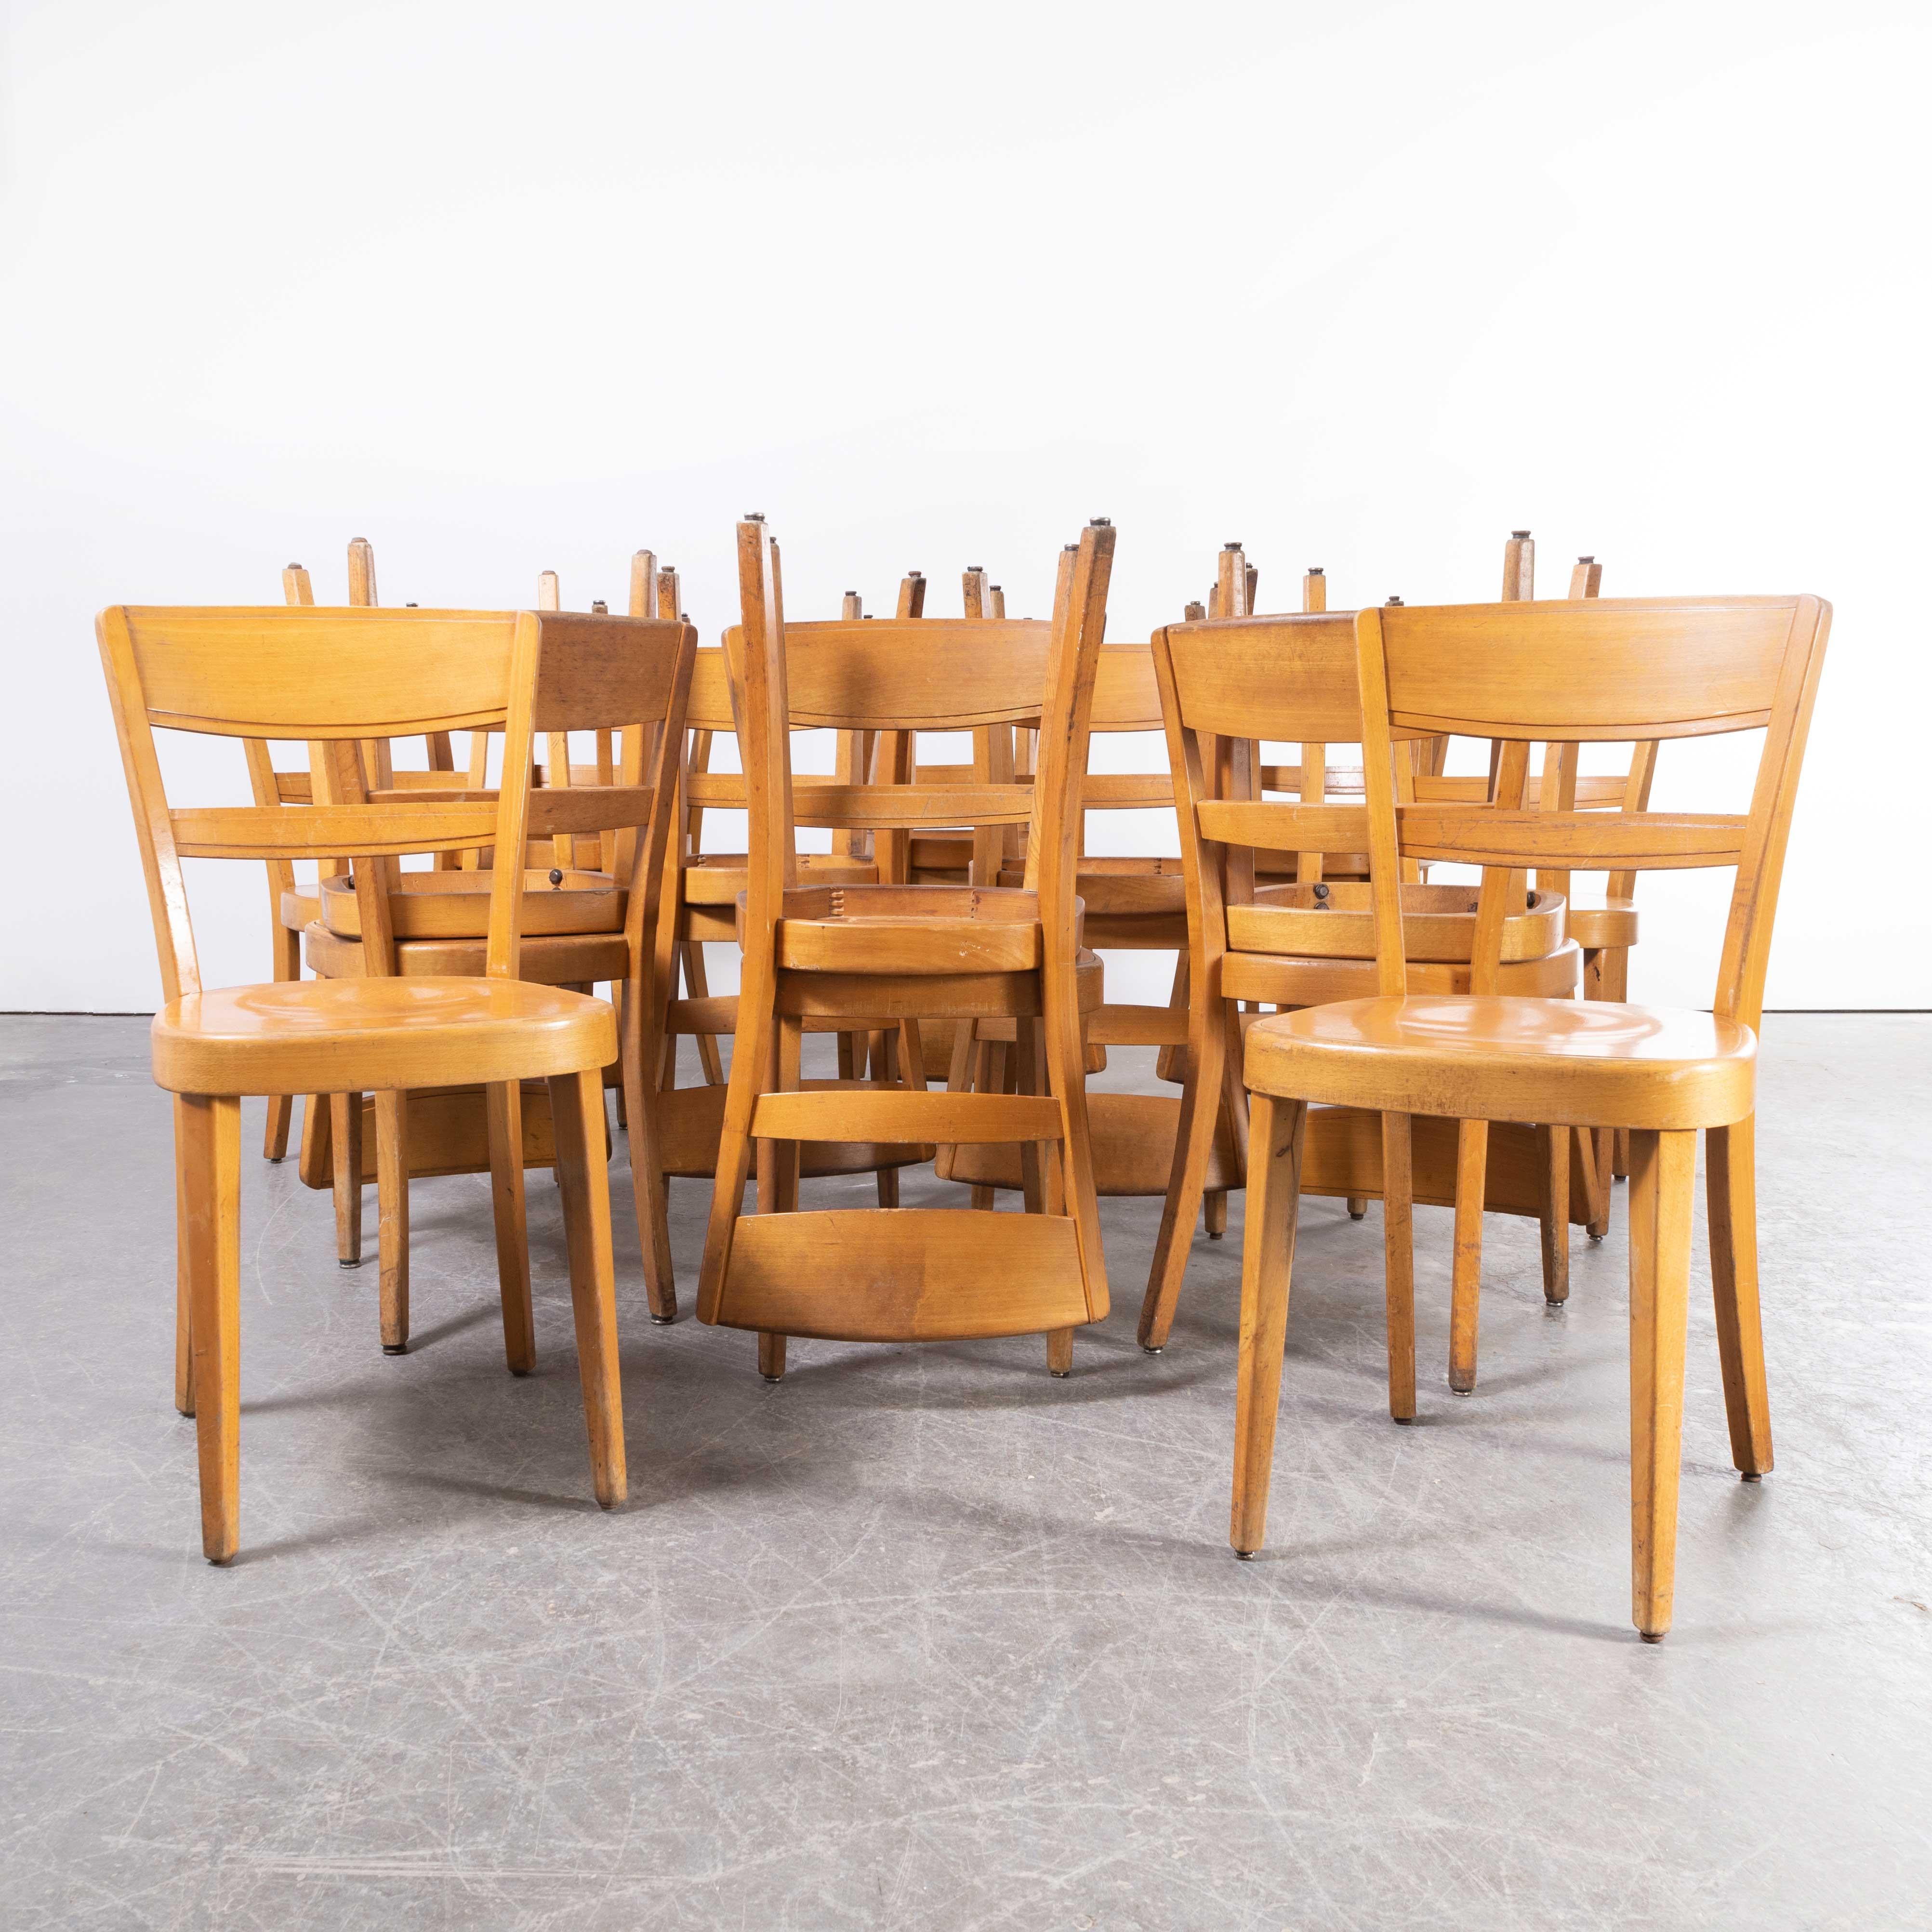 1960’s Horgen Glarus Beech Ladder Back Dining Chairs – Various Quantities Available
1960’s Horgen Glarus Beech Ladder Back Dining Chairs – Various Quantities Available. One of the best sets of chairs we have sourced and our first from Horgen Glarus